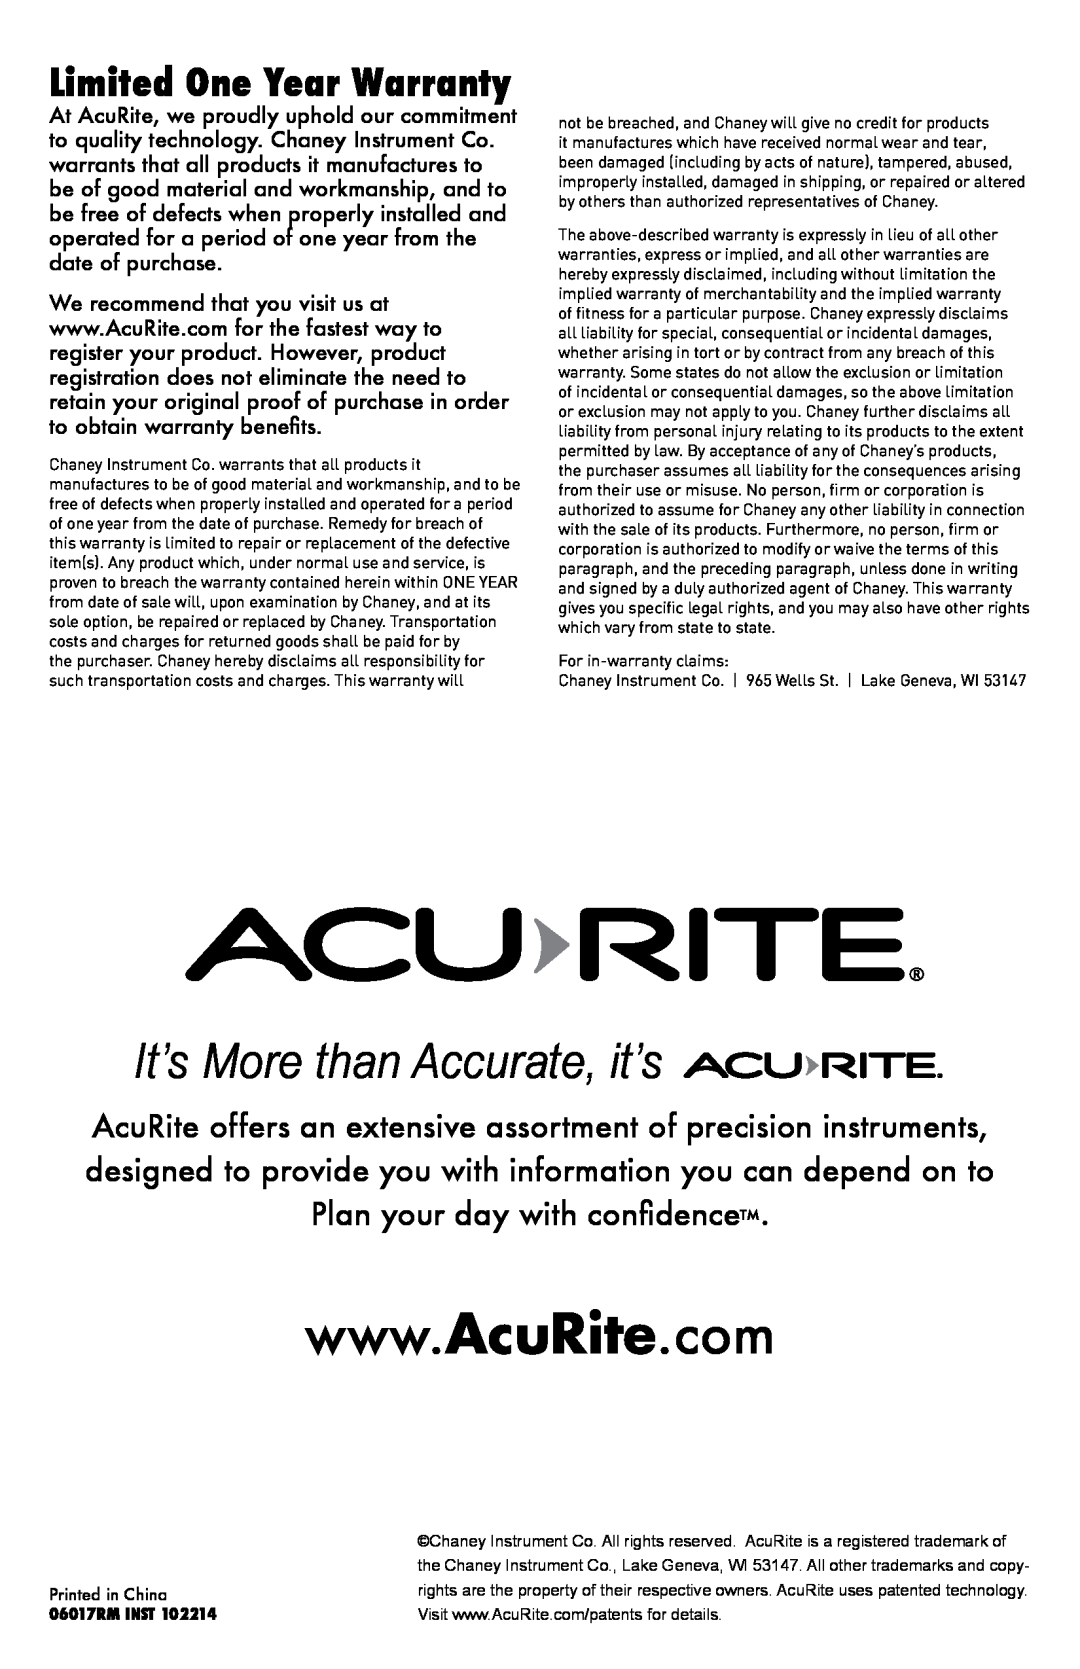 Acu-Rite instruction manual Limited One Year Warranty, It’s More than Accurate, it’s, 06017RM INST 